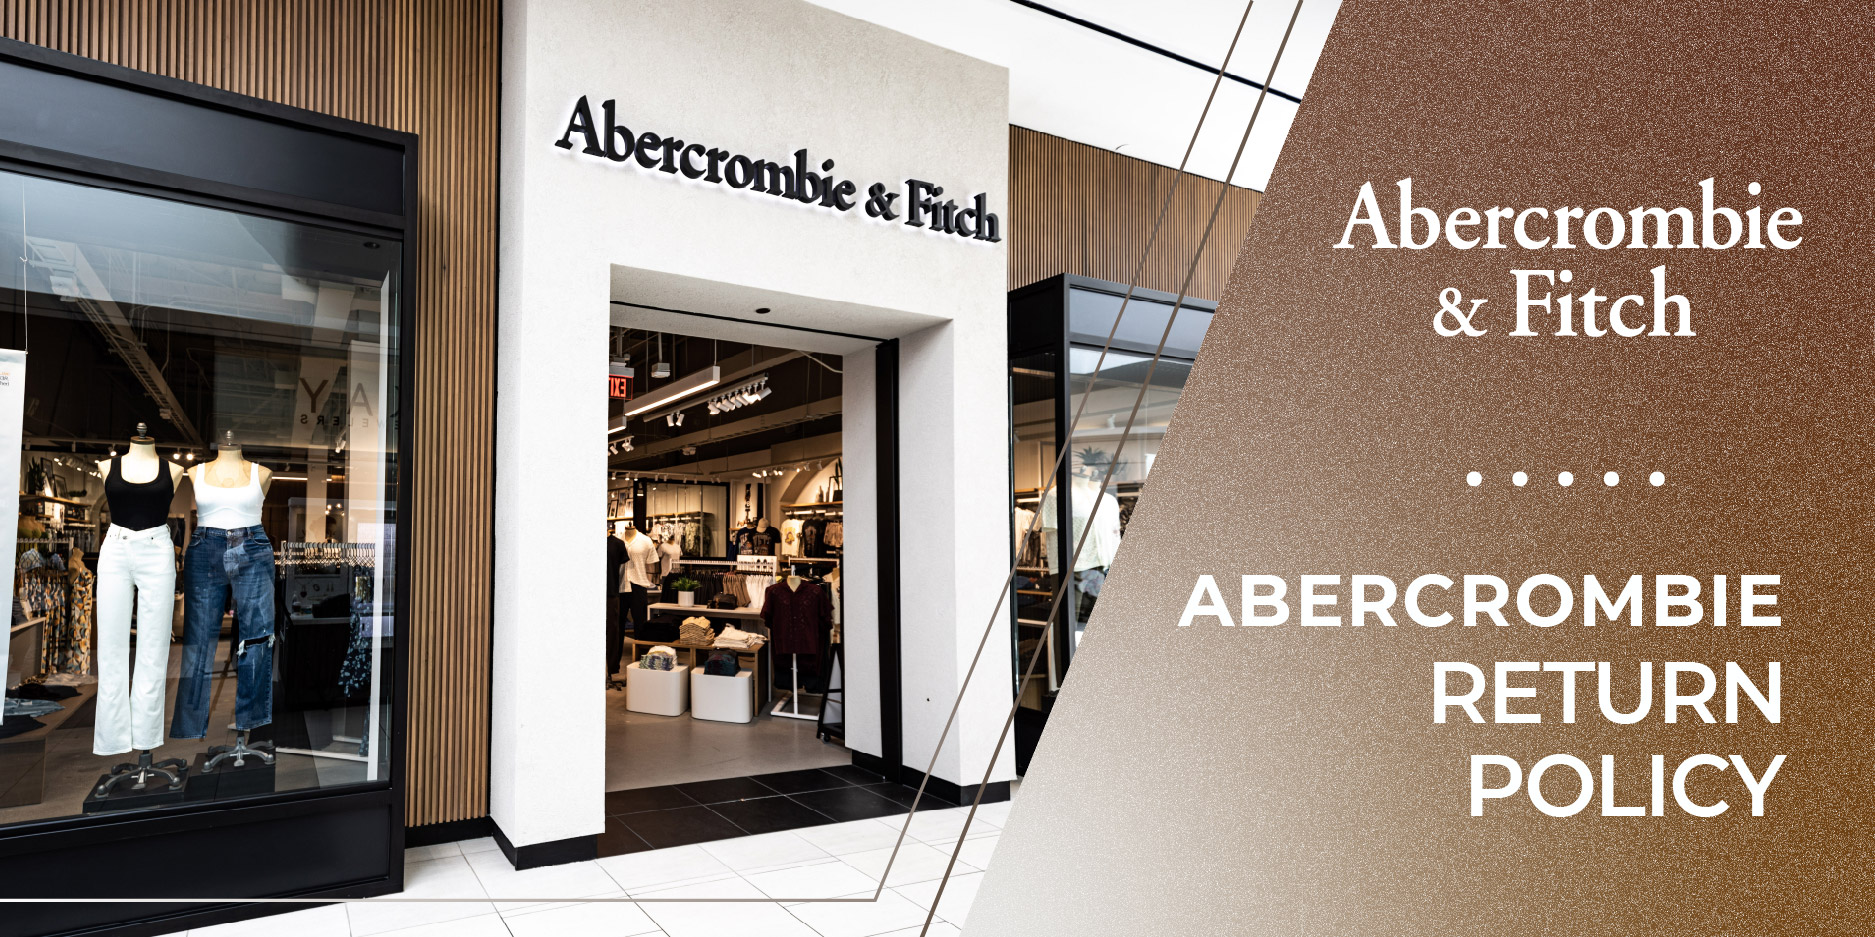 Abercrombie & Fitch Return Policy